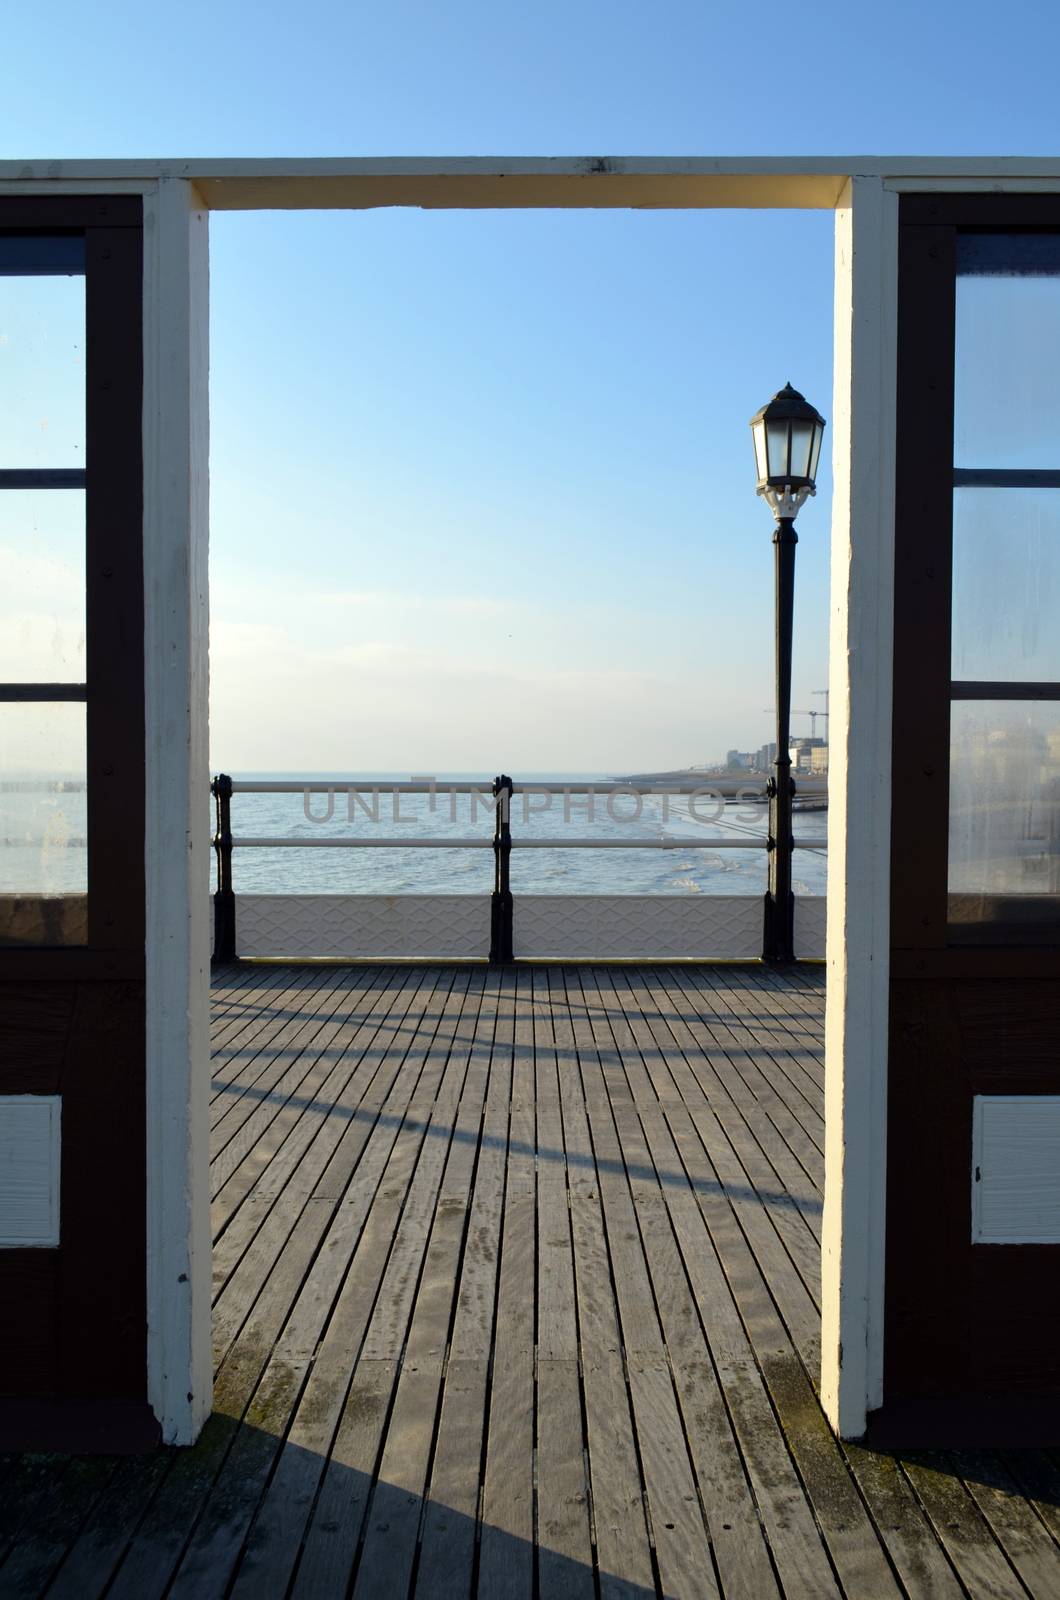 Victorian pier by bunsview